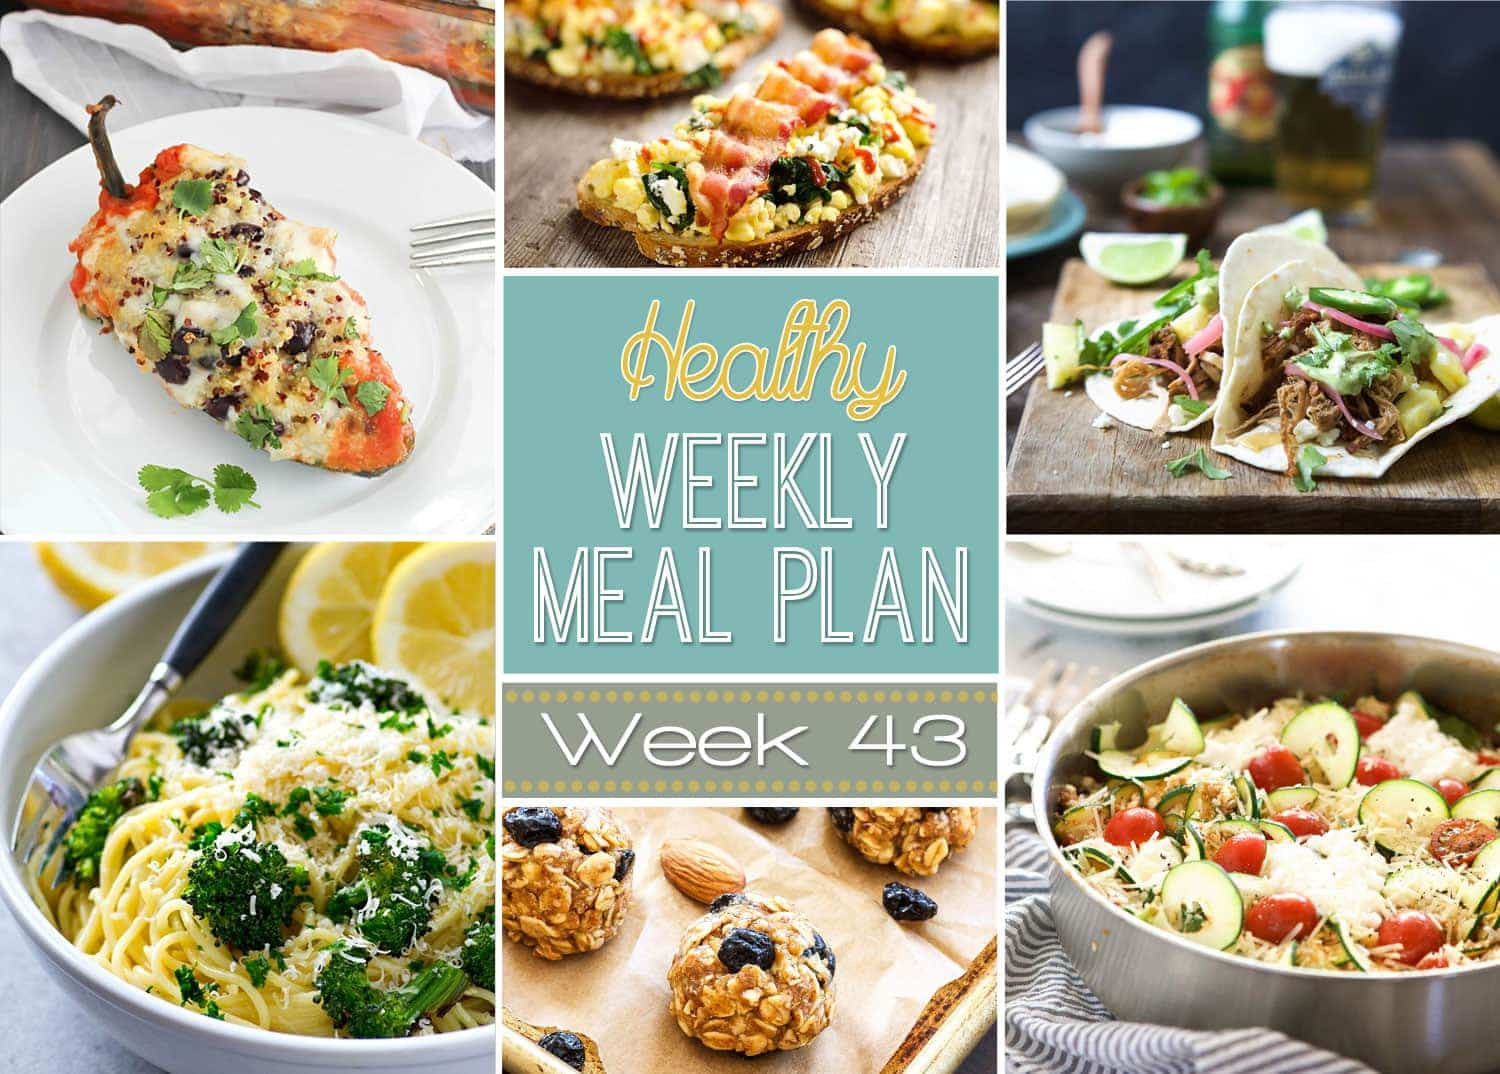 Healthy Meals For Breakfast Lunch And Dinner
 Healthy Meal Plan Week 43